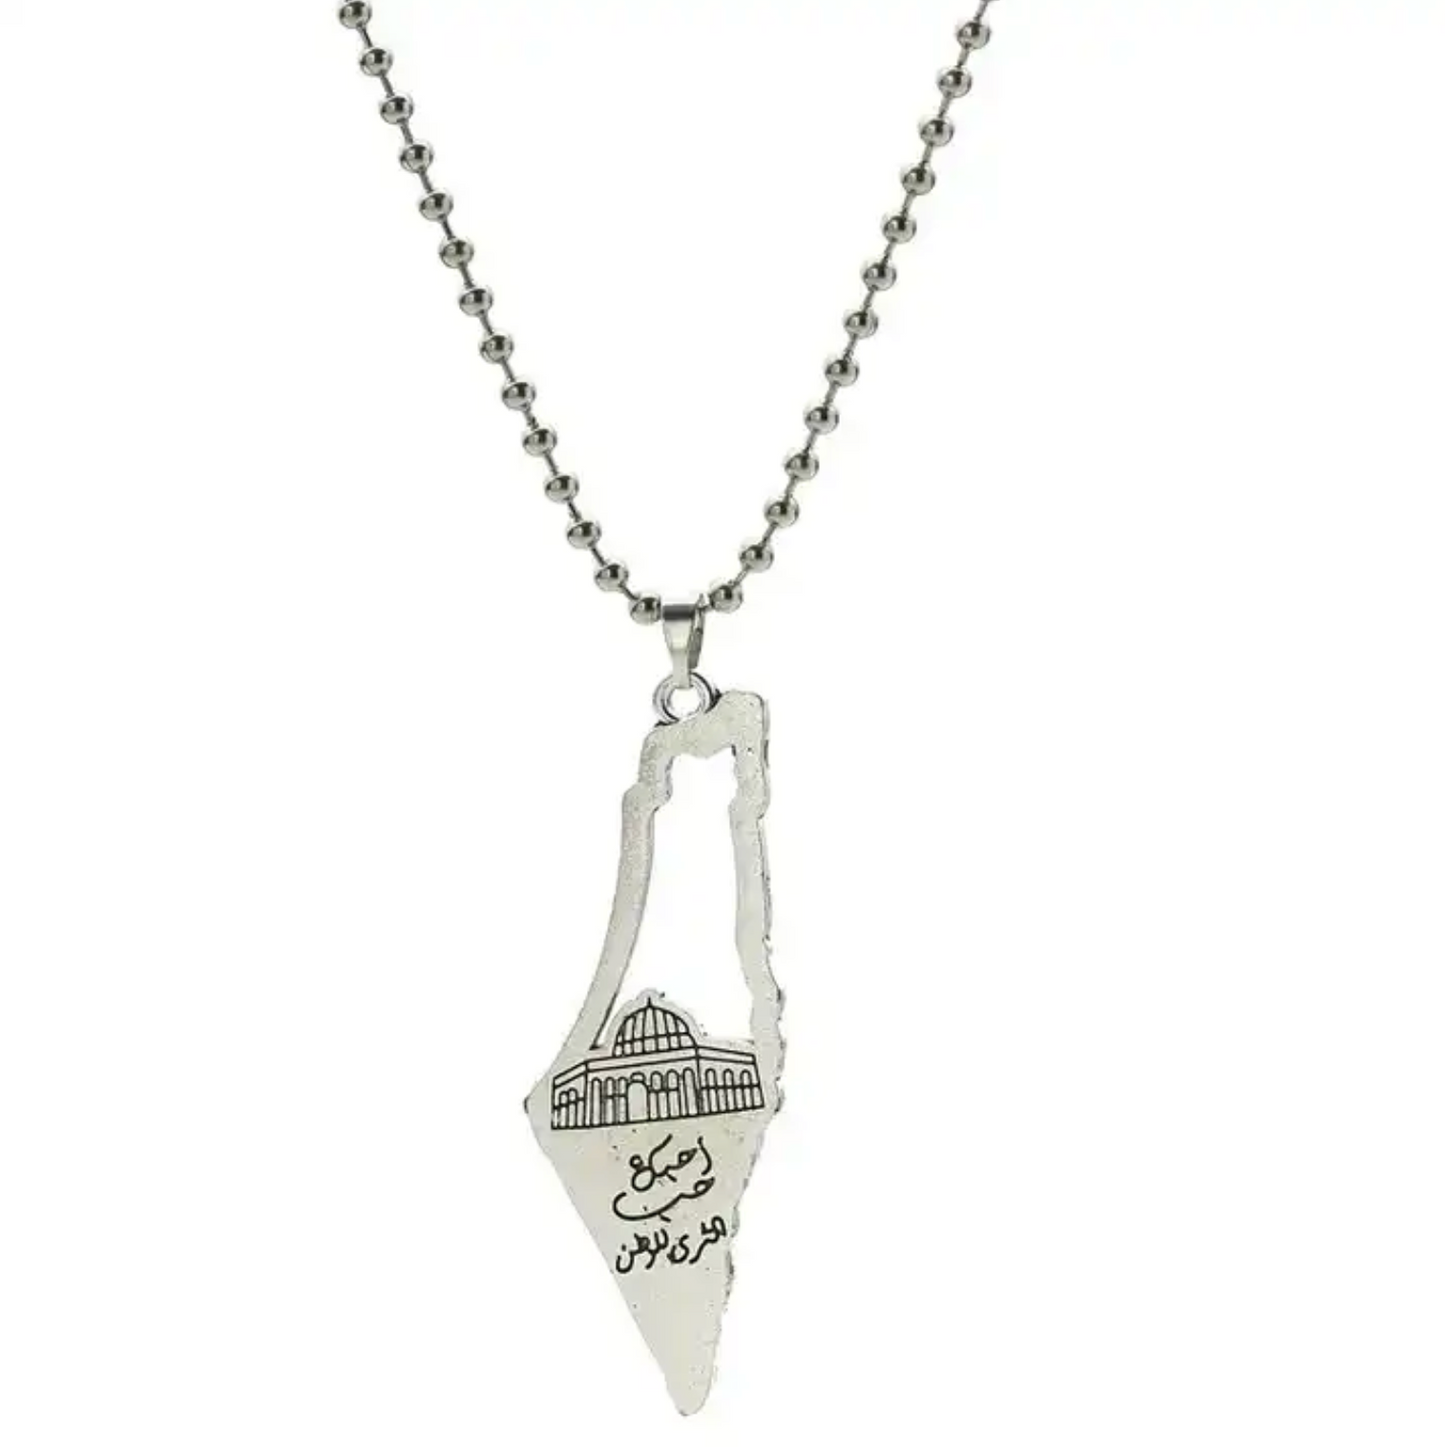 Palestine design necklace 100% proceeds will be donated.